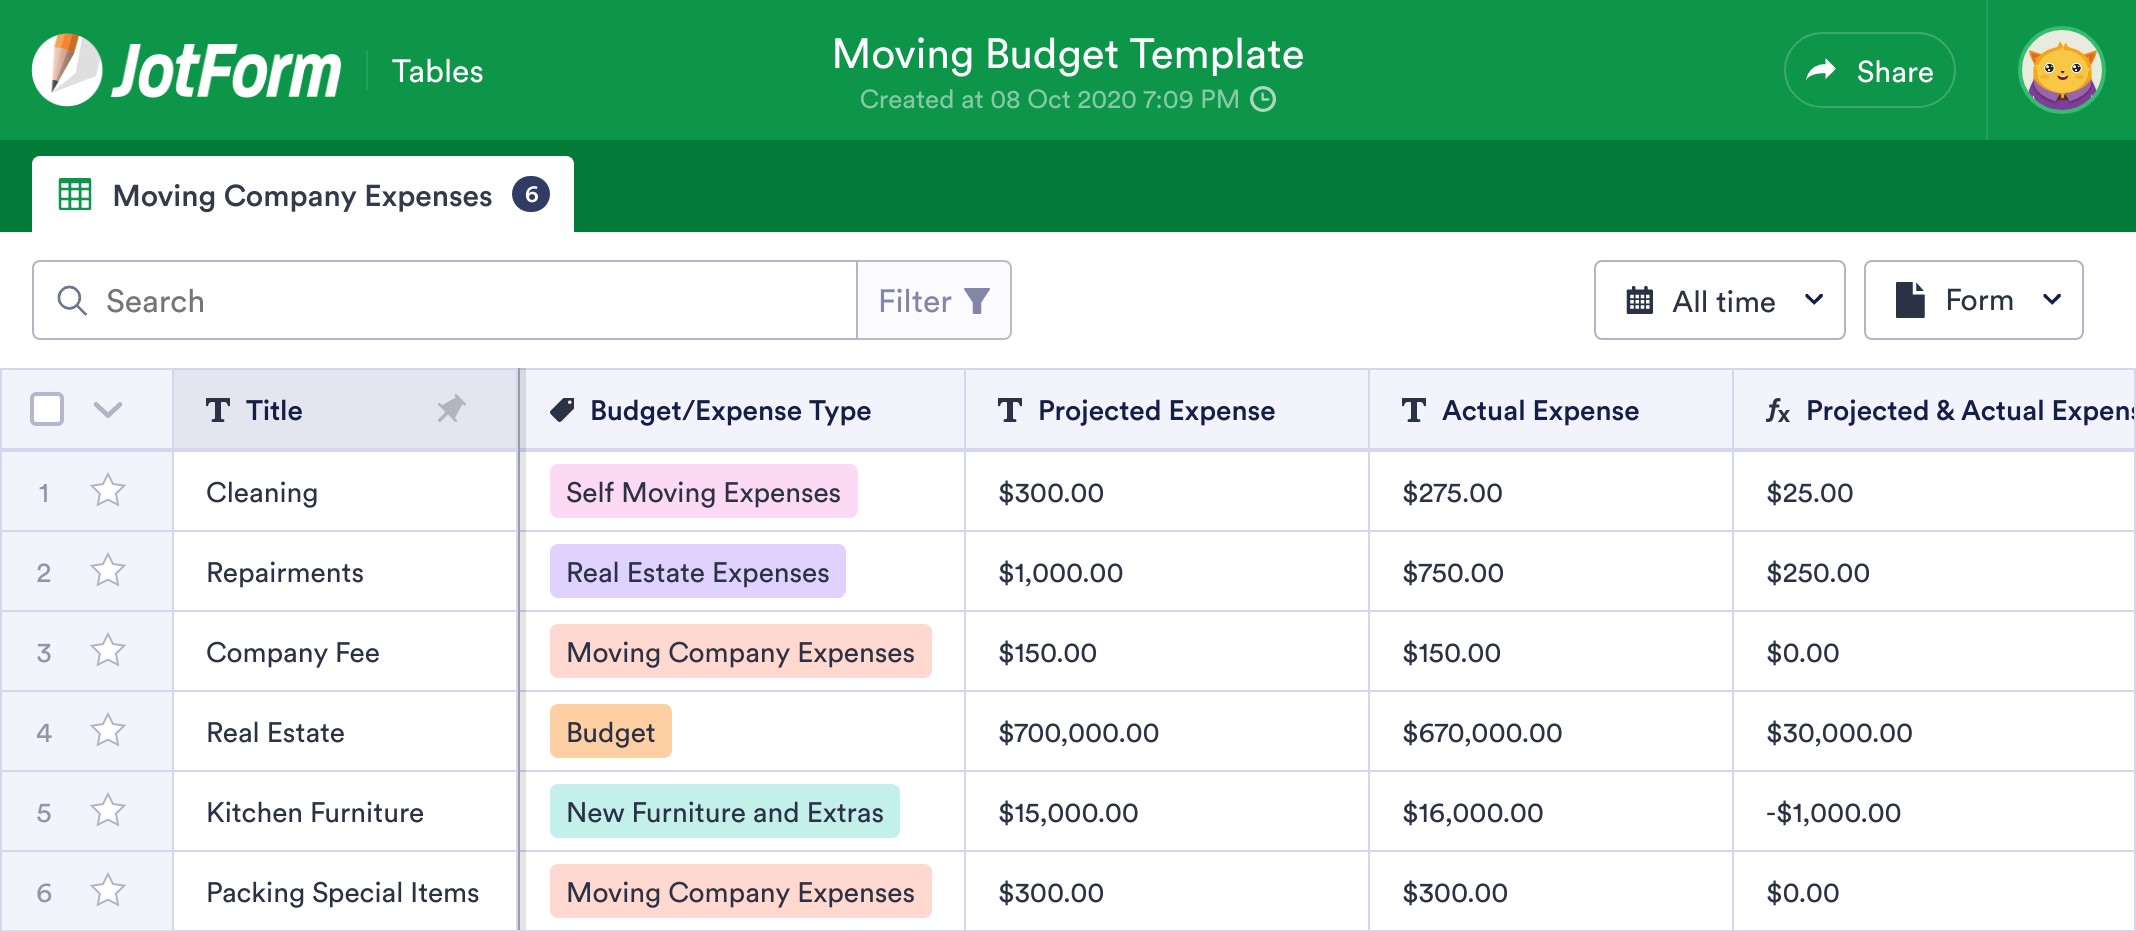 Relocation Expenses Template Throughout Office Relocation Budget Template Intended For Office Relocation Budget Template